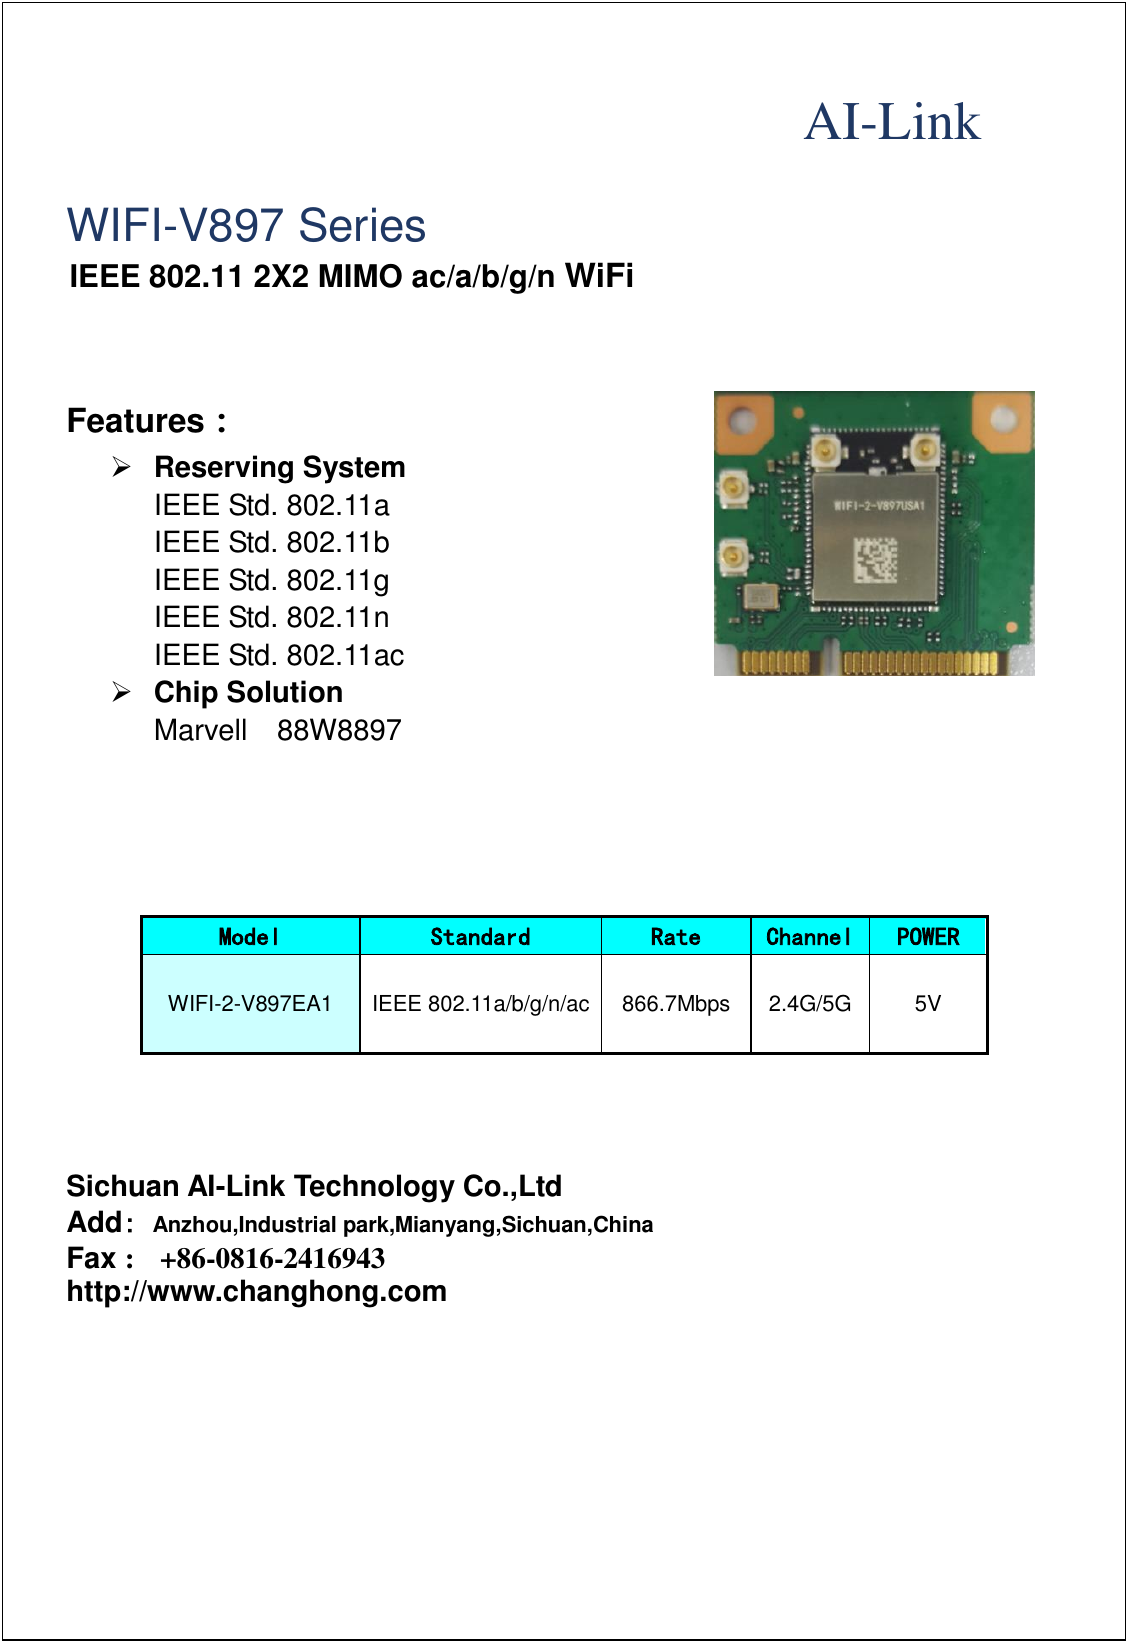                                                                                                                                         AI-Link    WIFI-V897 Series IEEE 802.11 2X2 MIMO ac/a/b/g/n WiFi      Features： ➢ Reserving System   IEEE Std. 802.11a   IEEE Std. 802.11b   IEEE Std. 802.11g   IEEE Std. 802.11n IEEE Std. 802.11ac ➢ Chip Solution Marvell    88W8897      Model Standard Rate Channel POWER WIFI-2-V897EA1 IEEE 802.11a/b/g/n/ac 866.7Mbps 2.4G/5G 5V       Sichuan AI-Link Technology Co.,Ltd Add: Anzhou,Industrial park,Mianyang,Sichuan,China Fax :   +86-0816-2416943 http://www.changhong.com  